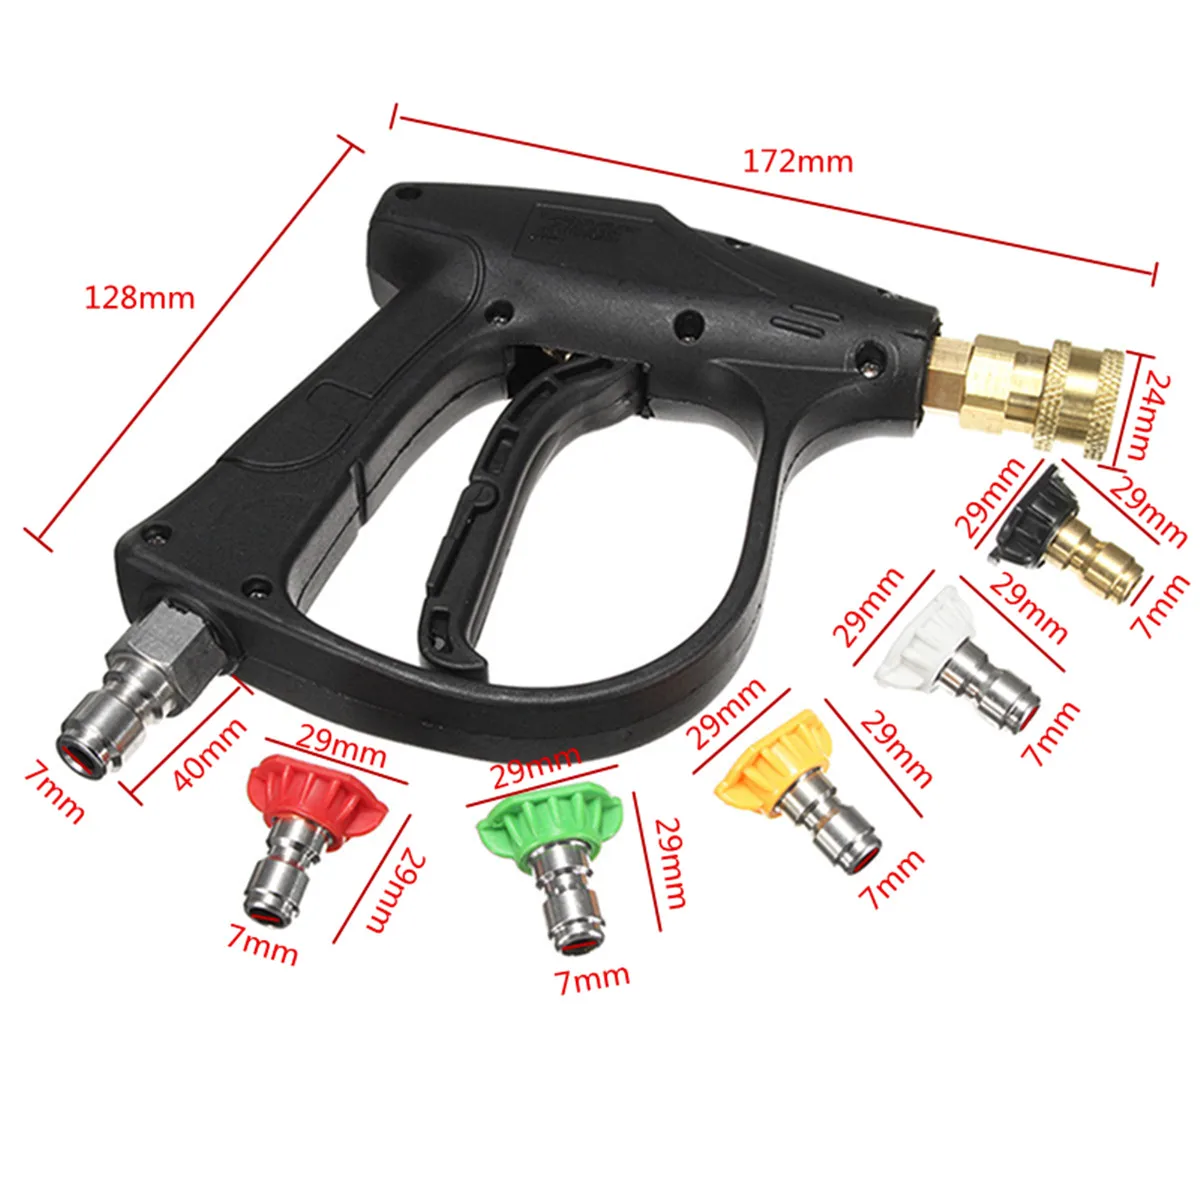 

3000PSI High Pressure Washer Water Guns 1/4" 3/8" Quick Connect Adapter with 5 Nozzles Tips for Karcher Car Washer Foam Lance